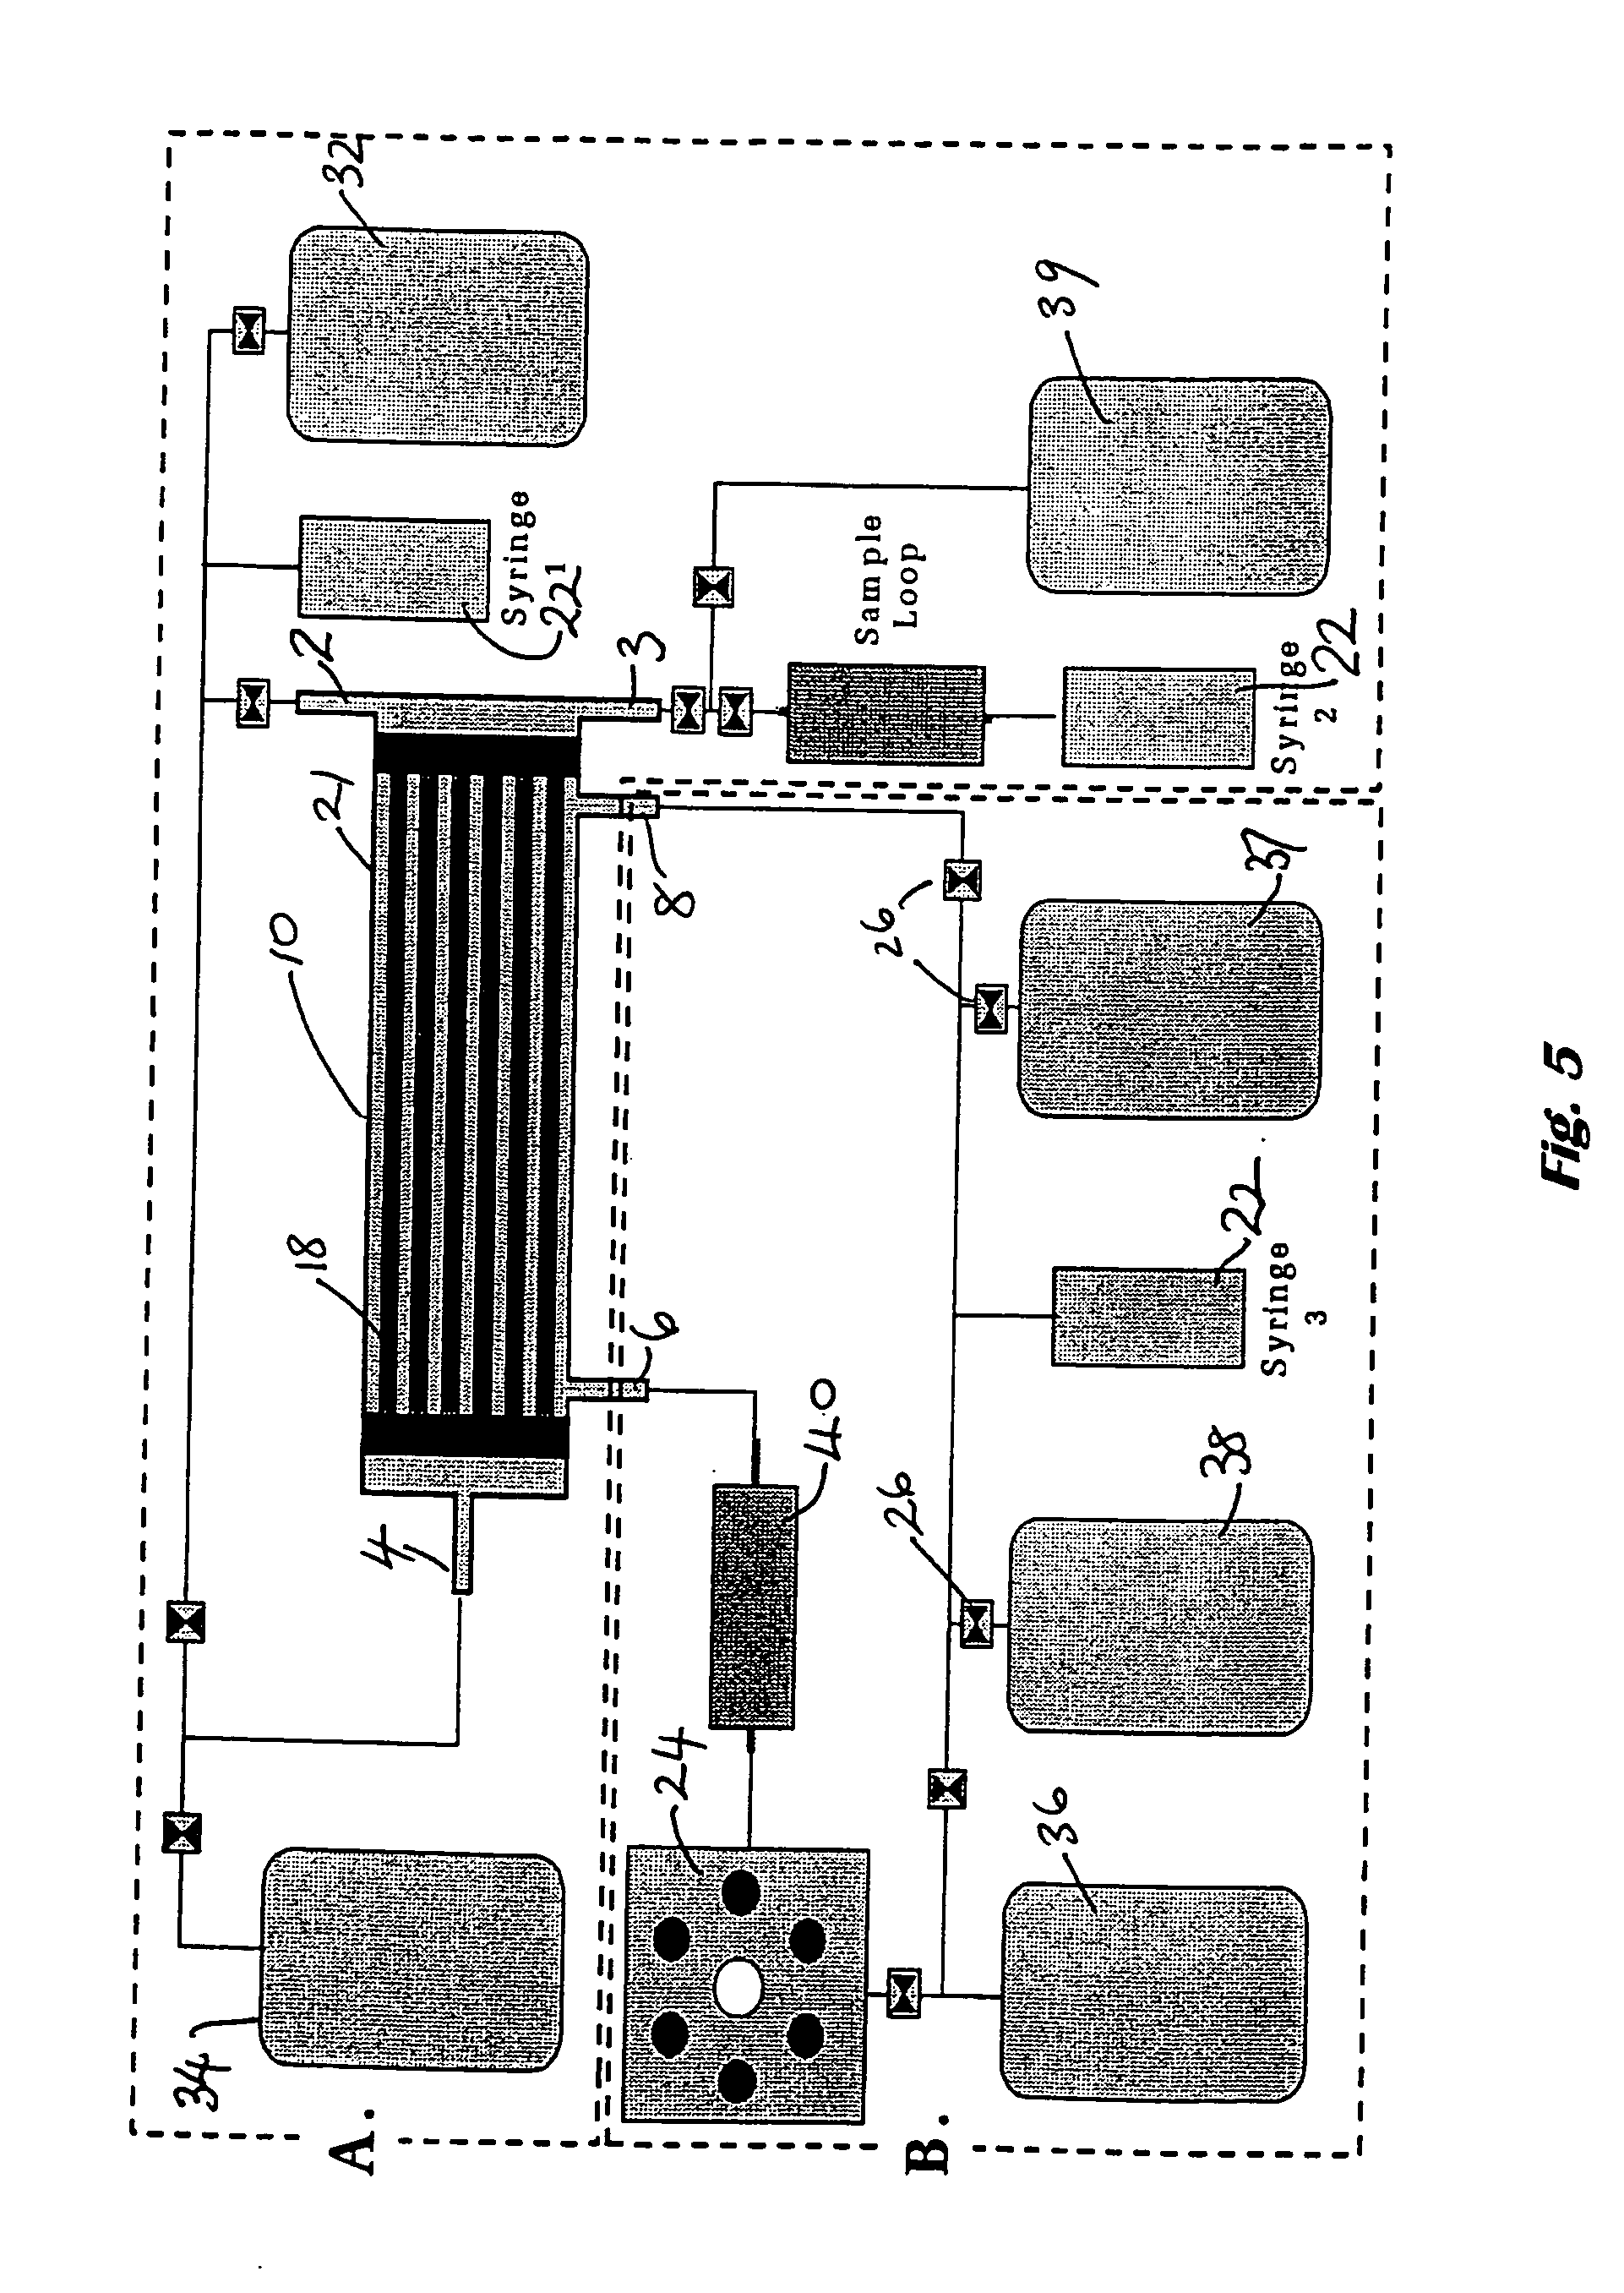 Method and apparatus for culturing cells